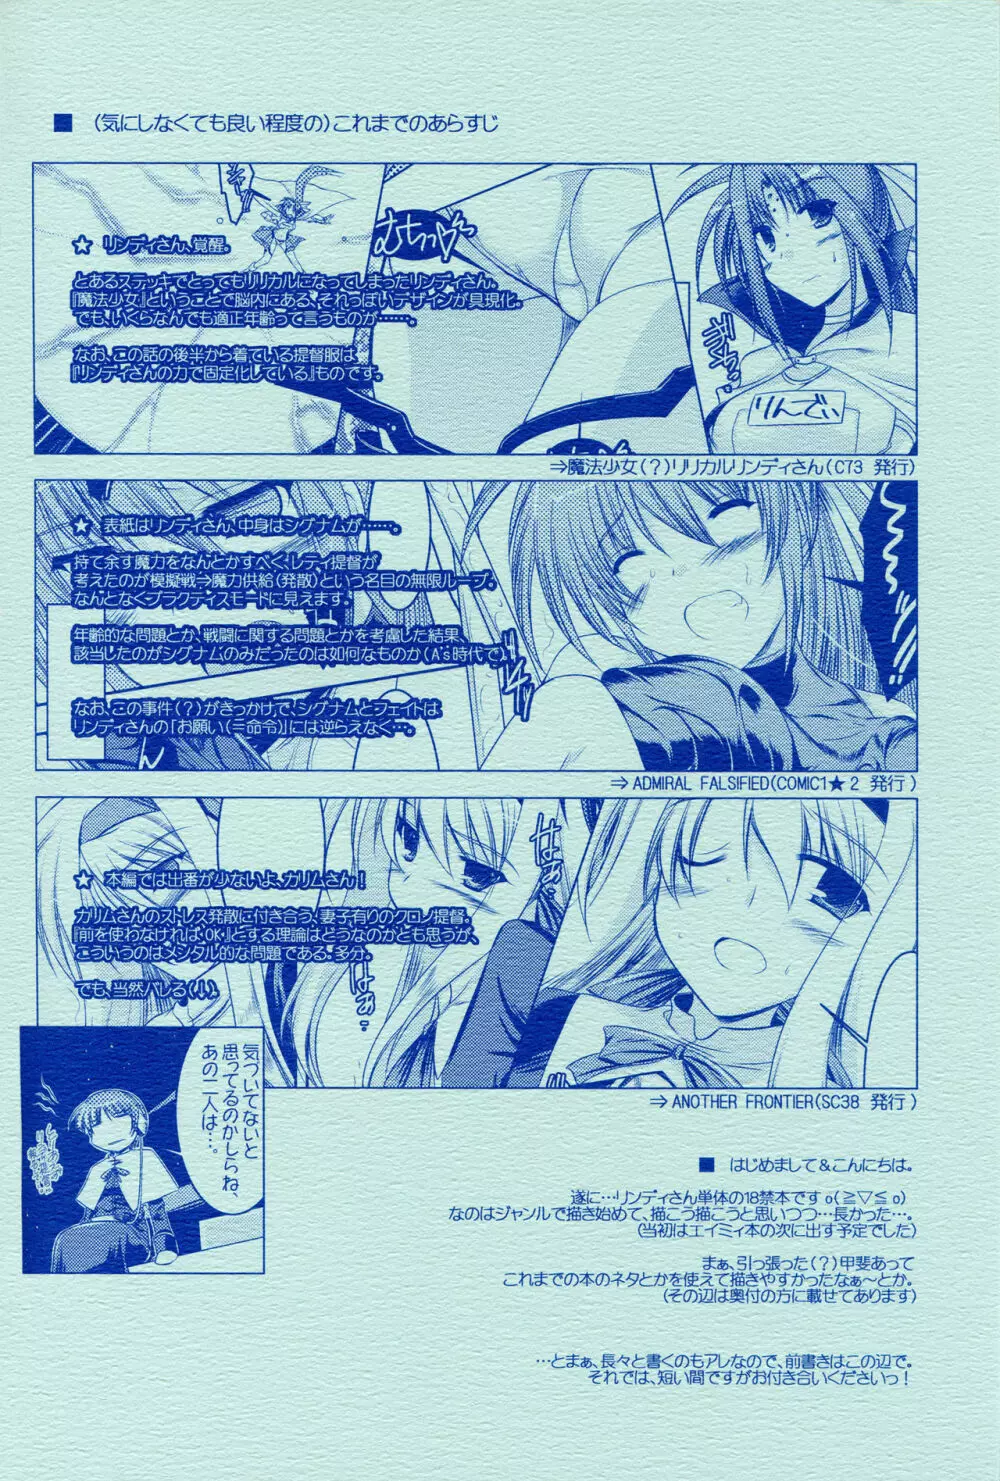 ANOTHER FRONTIER 02 魔法少女リリカルリンディさん #03 Page.3